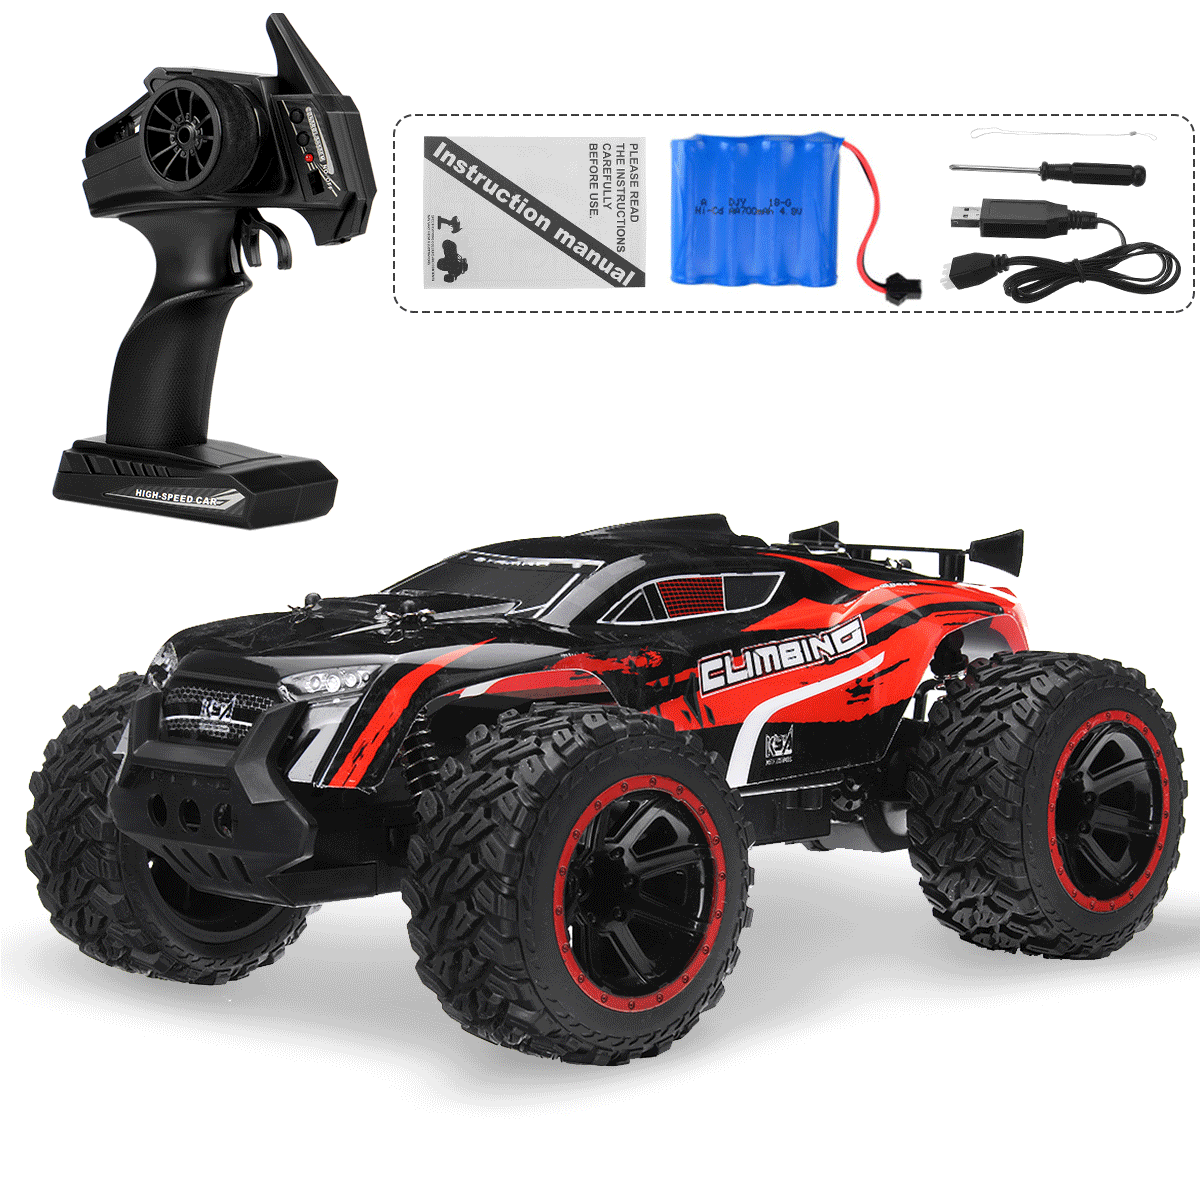 FAST RC RADIO REMOTE CONTROL CAR 1:10  RECHARGEABLE 45 Cm Long Blue Red UK 